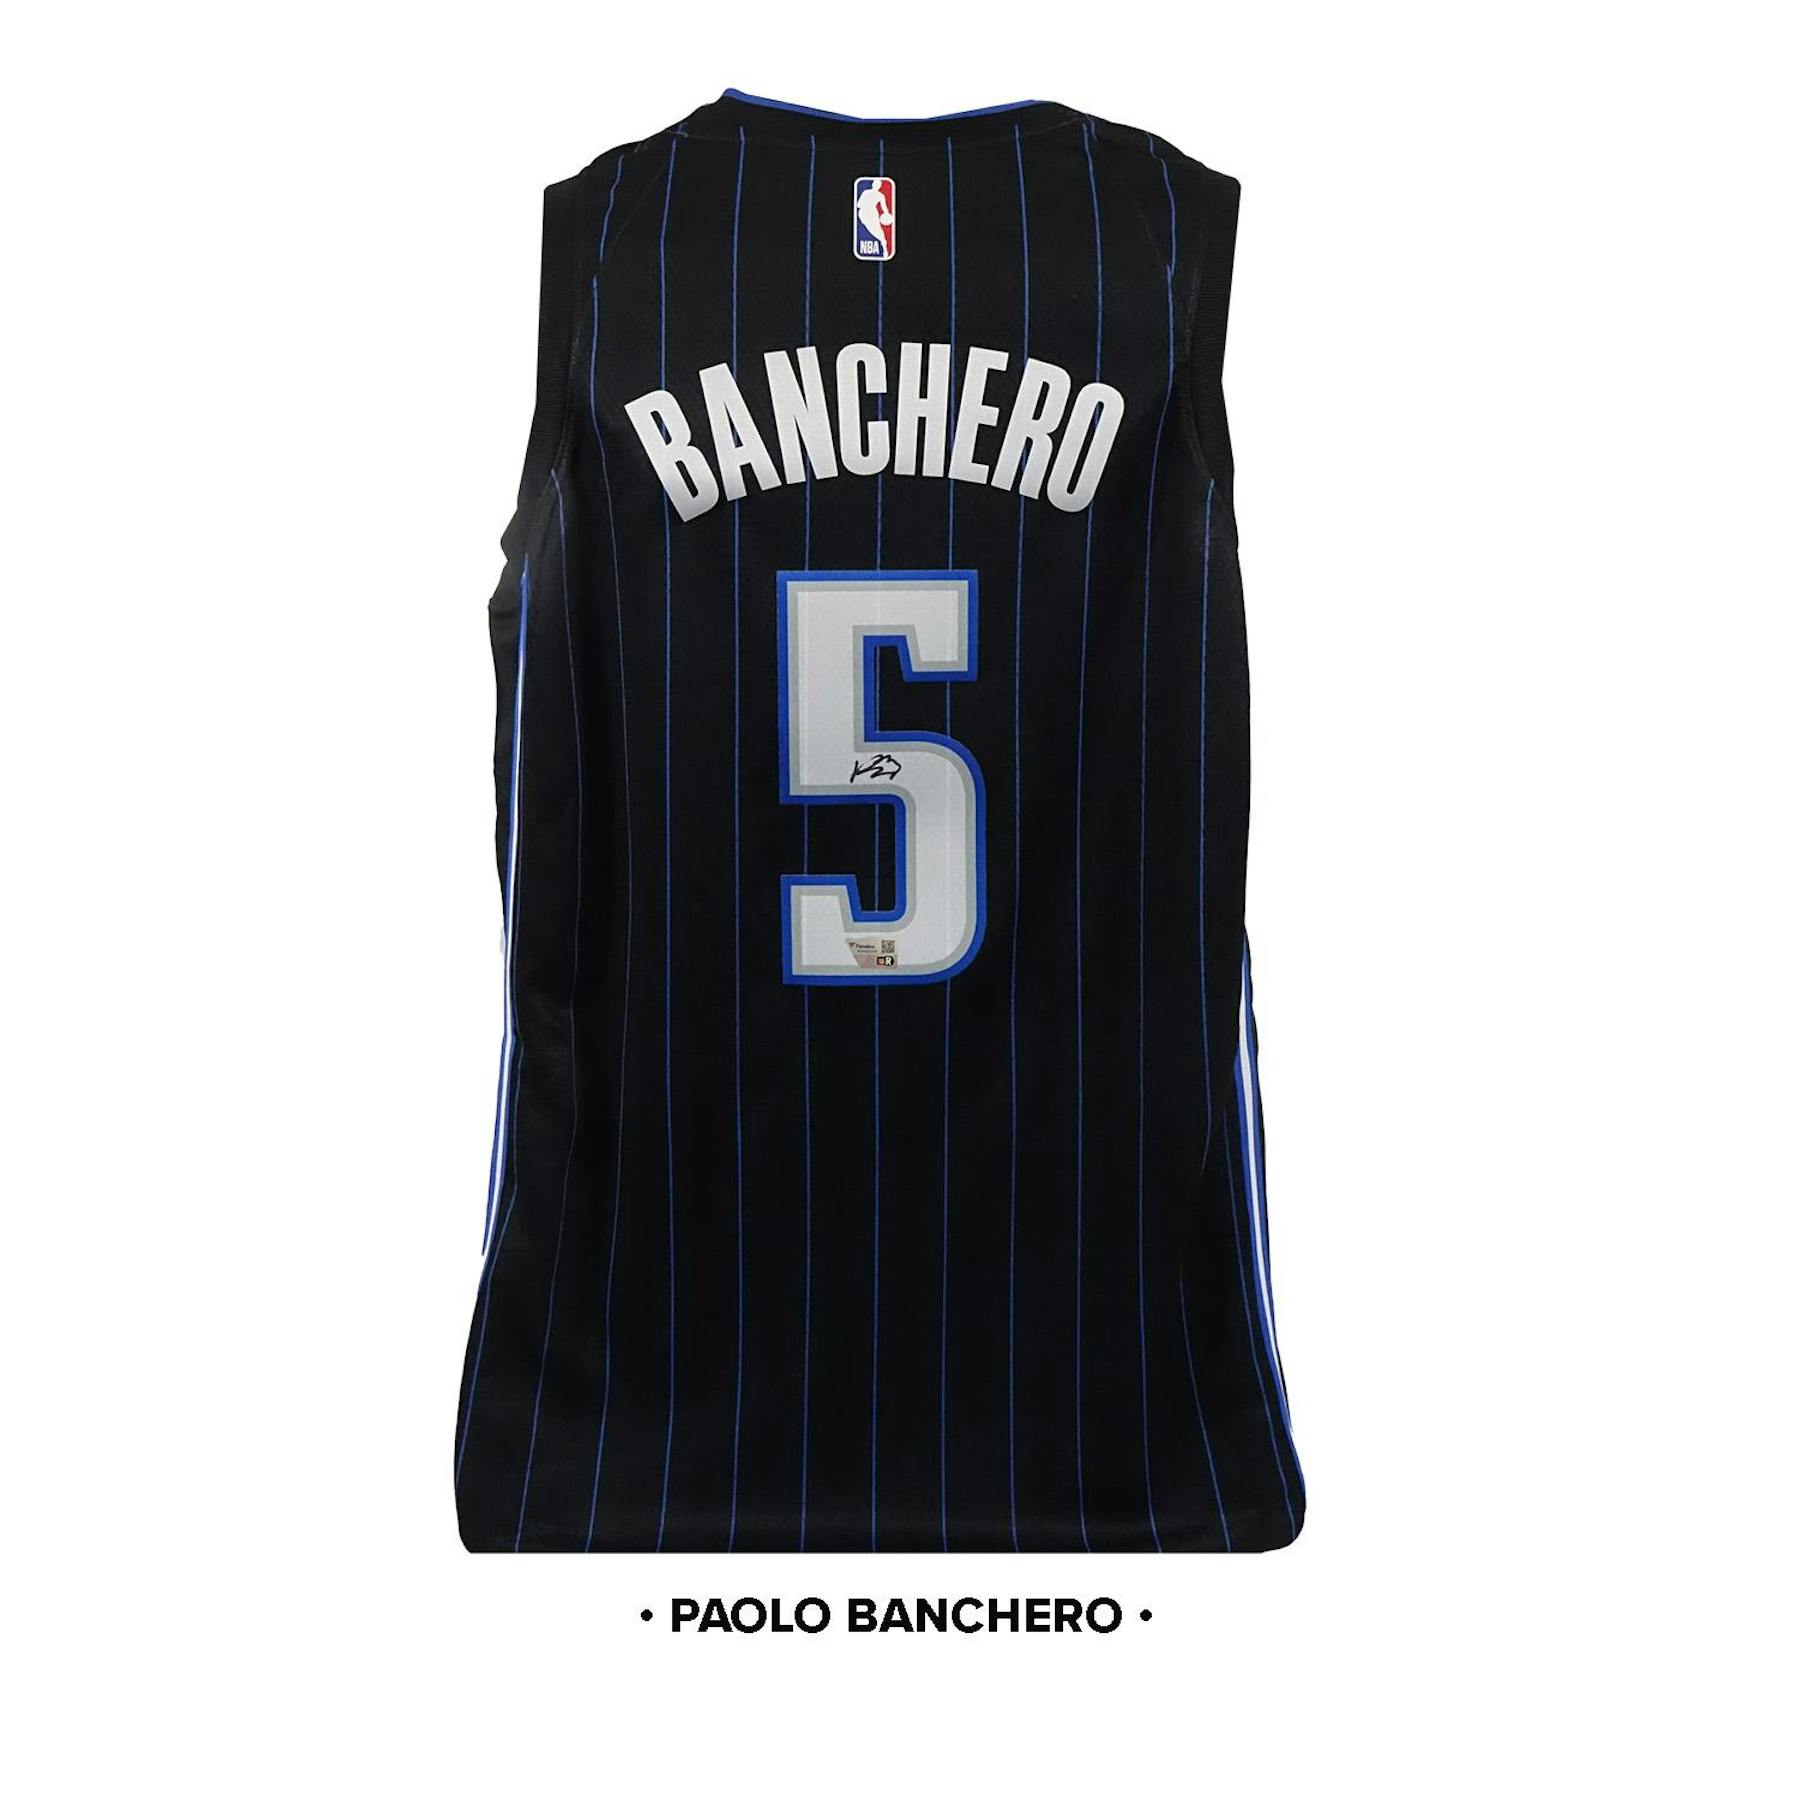 hit parade autographed basketball jersey